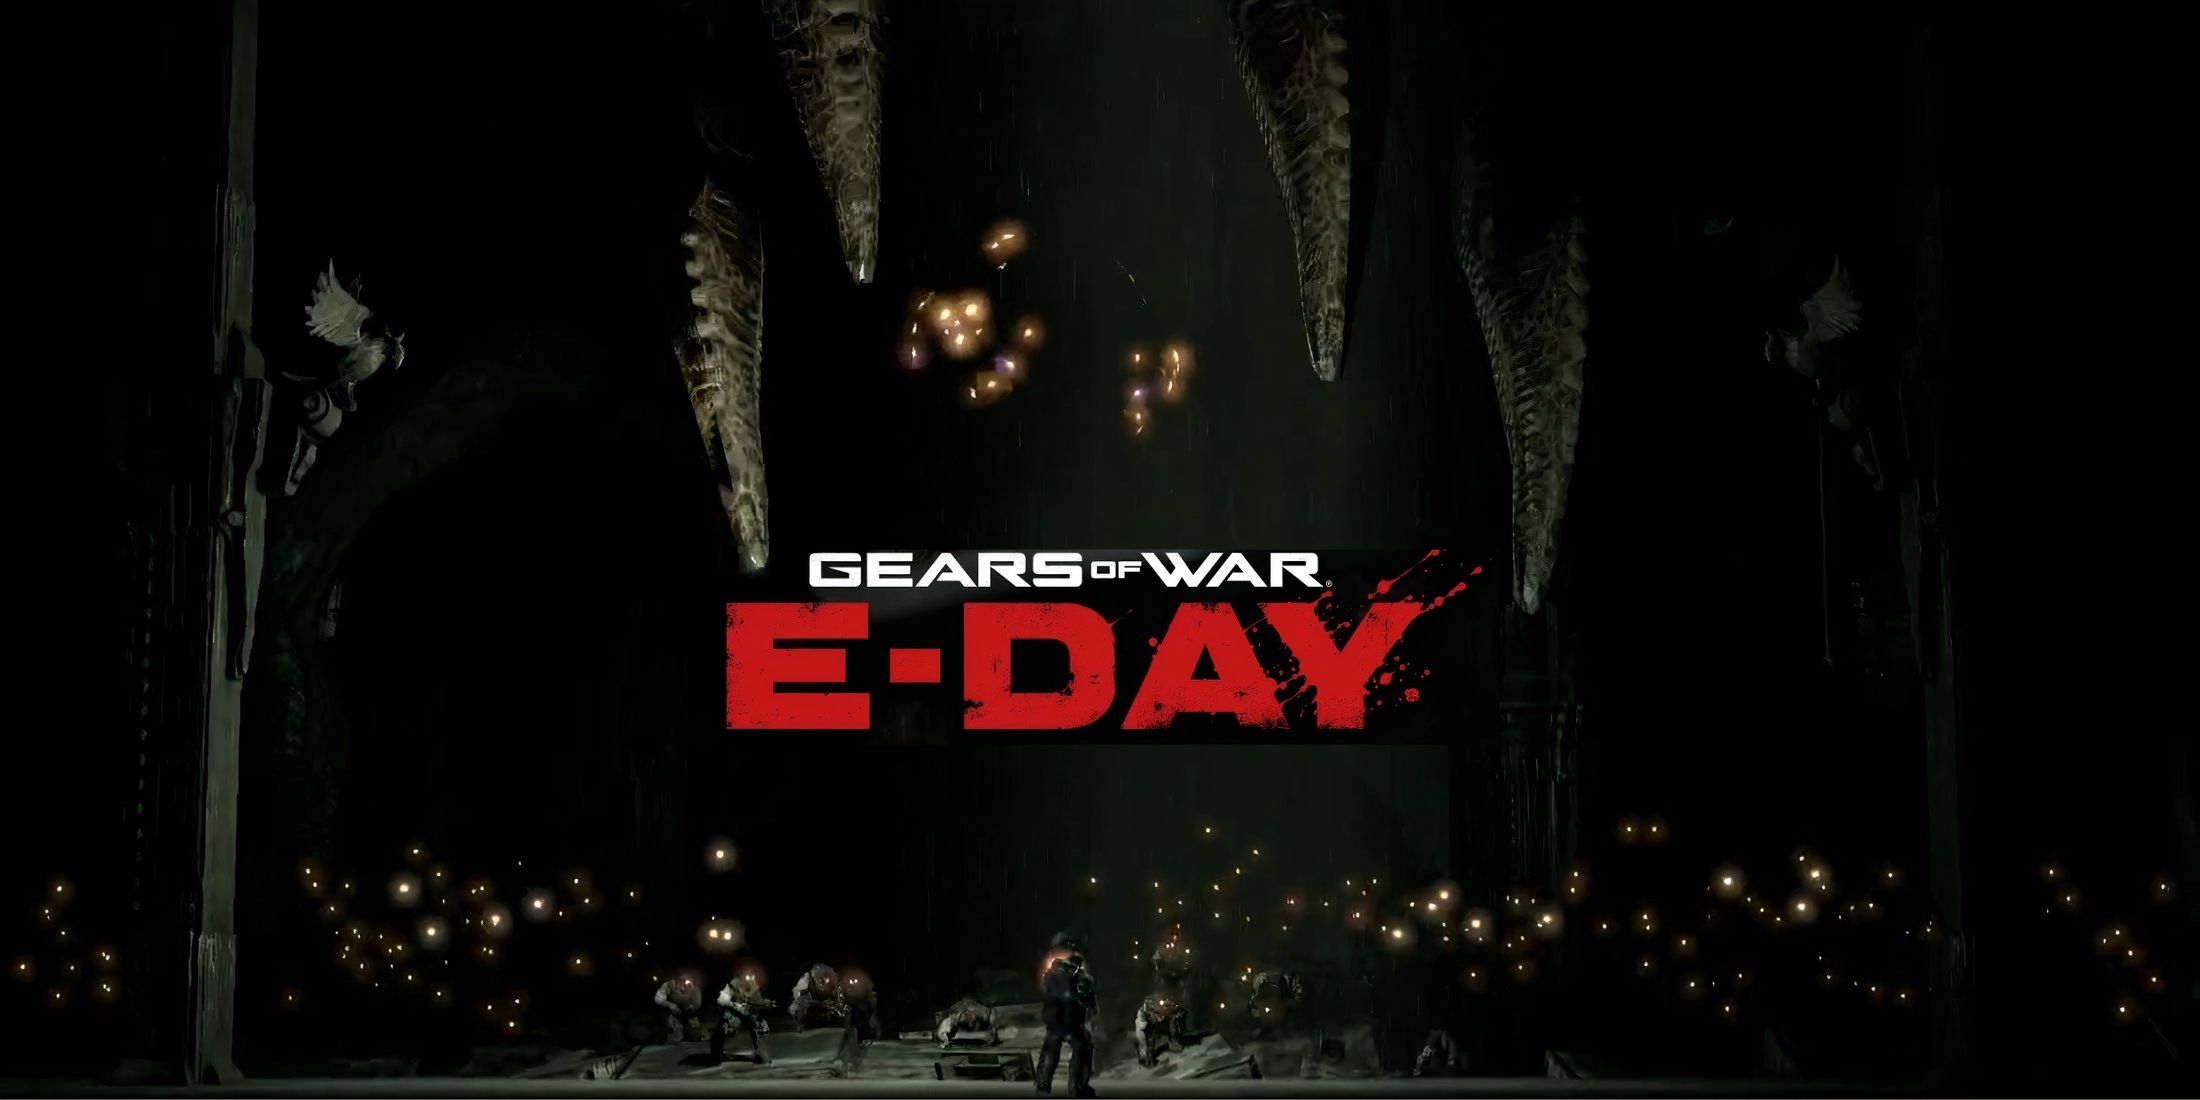 Gears of War E-Day Could Use a Trio of Locust Type to be Truly Terrifying